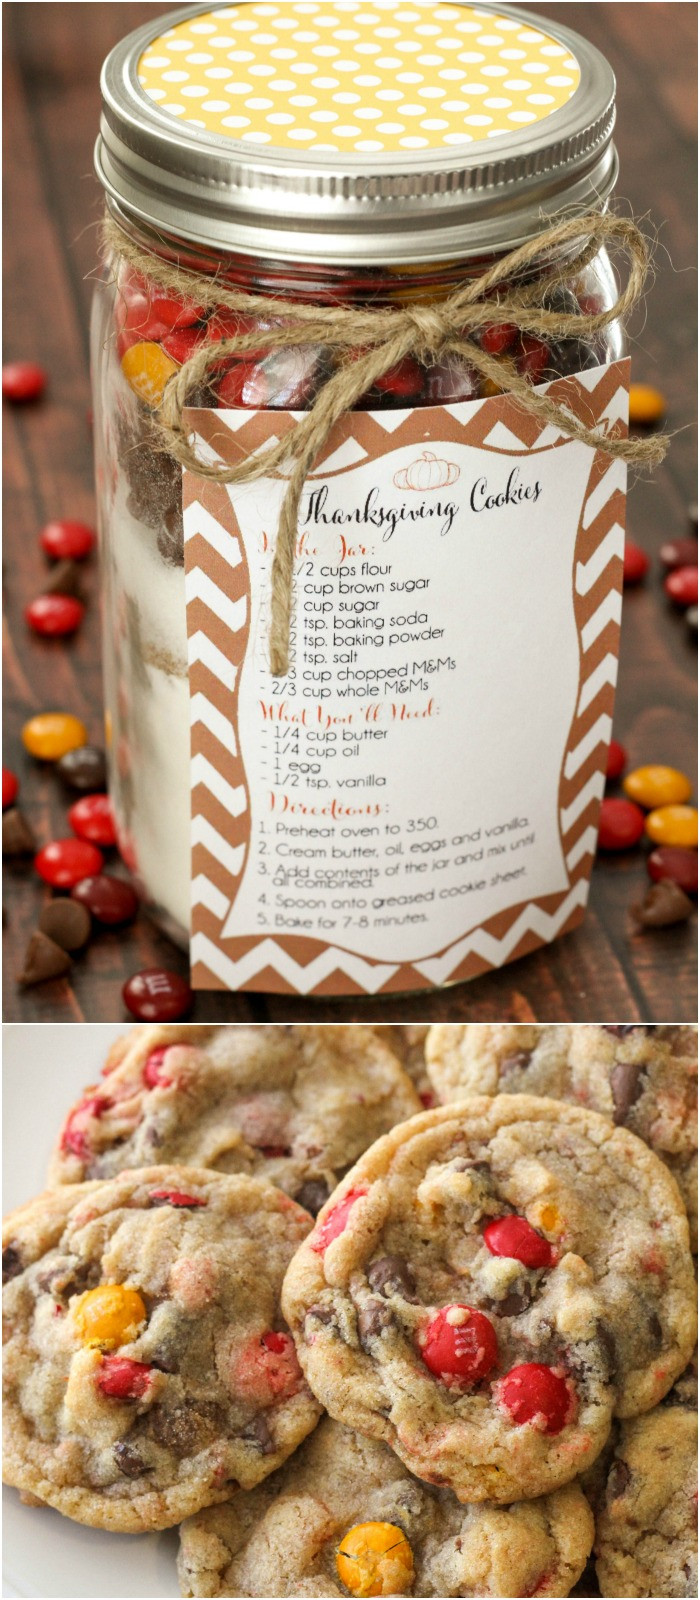 Thanksgiving Gift Ideas For Friends
 Thanksgiving Cookie Jar Gift